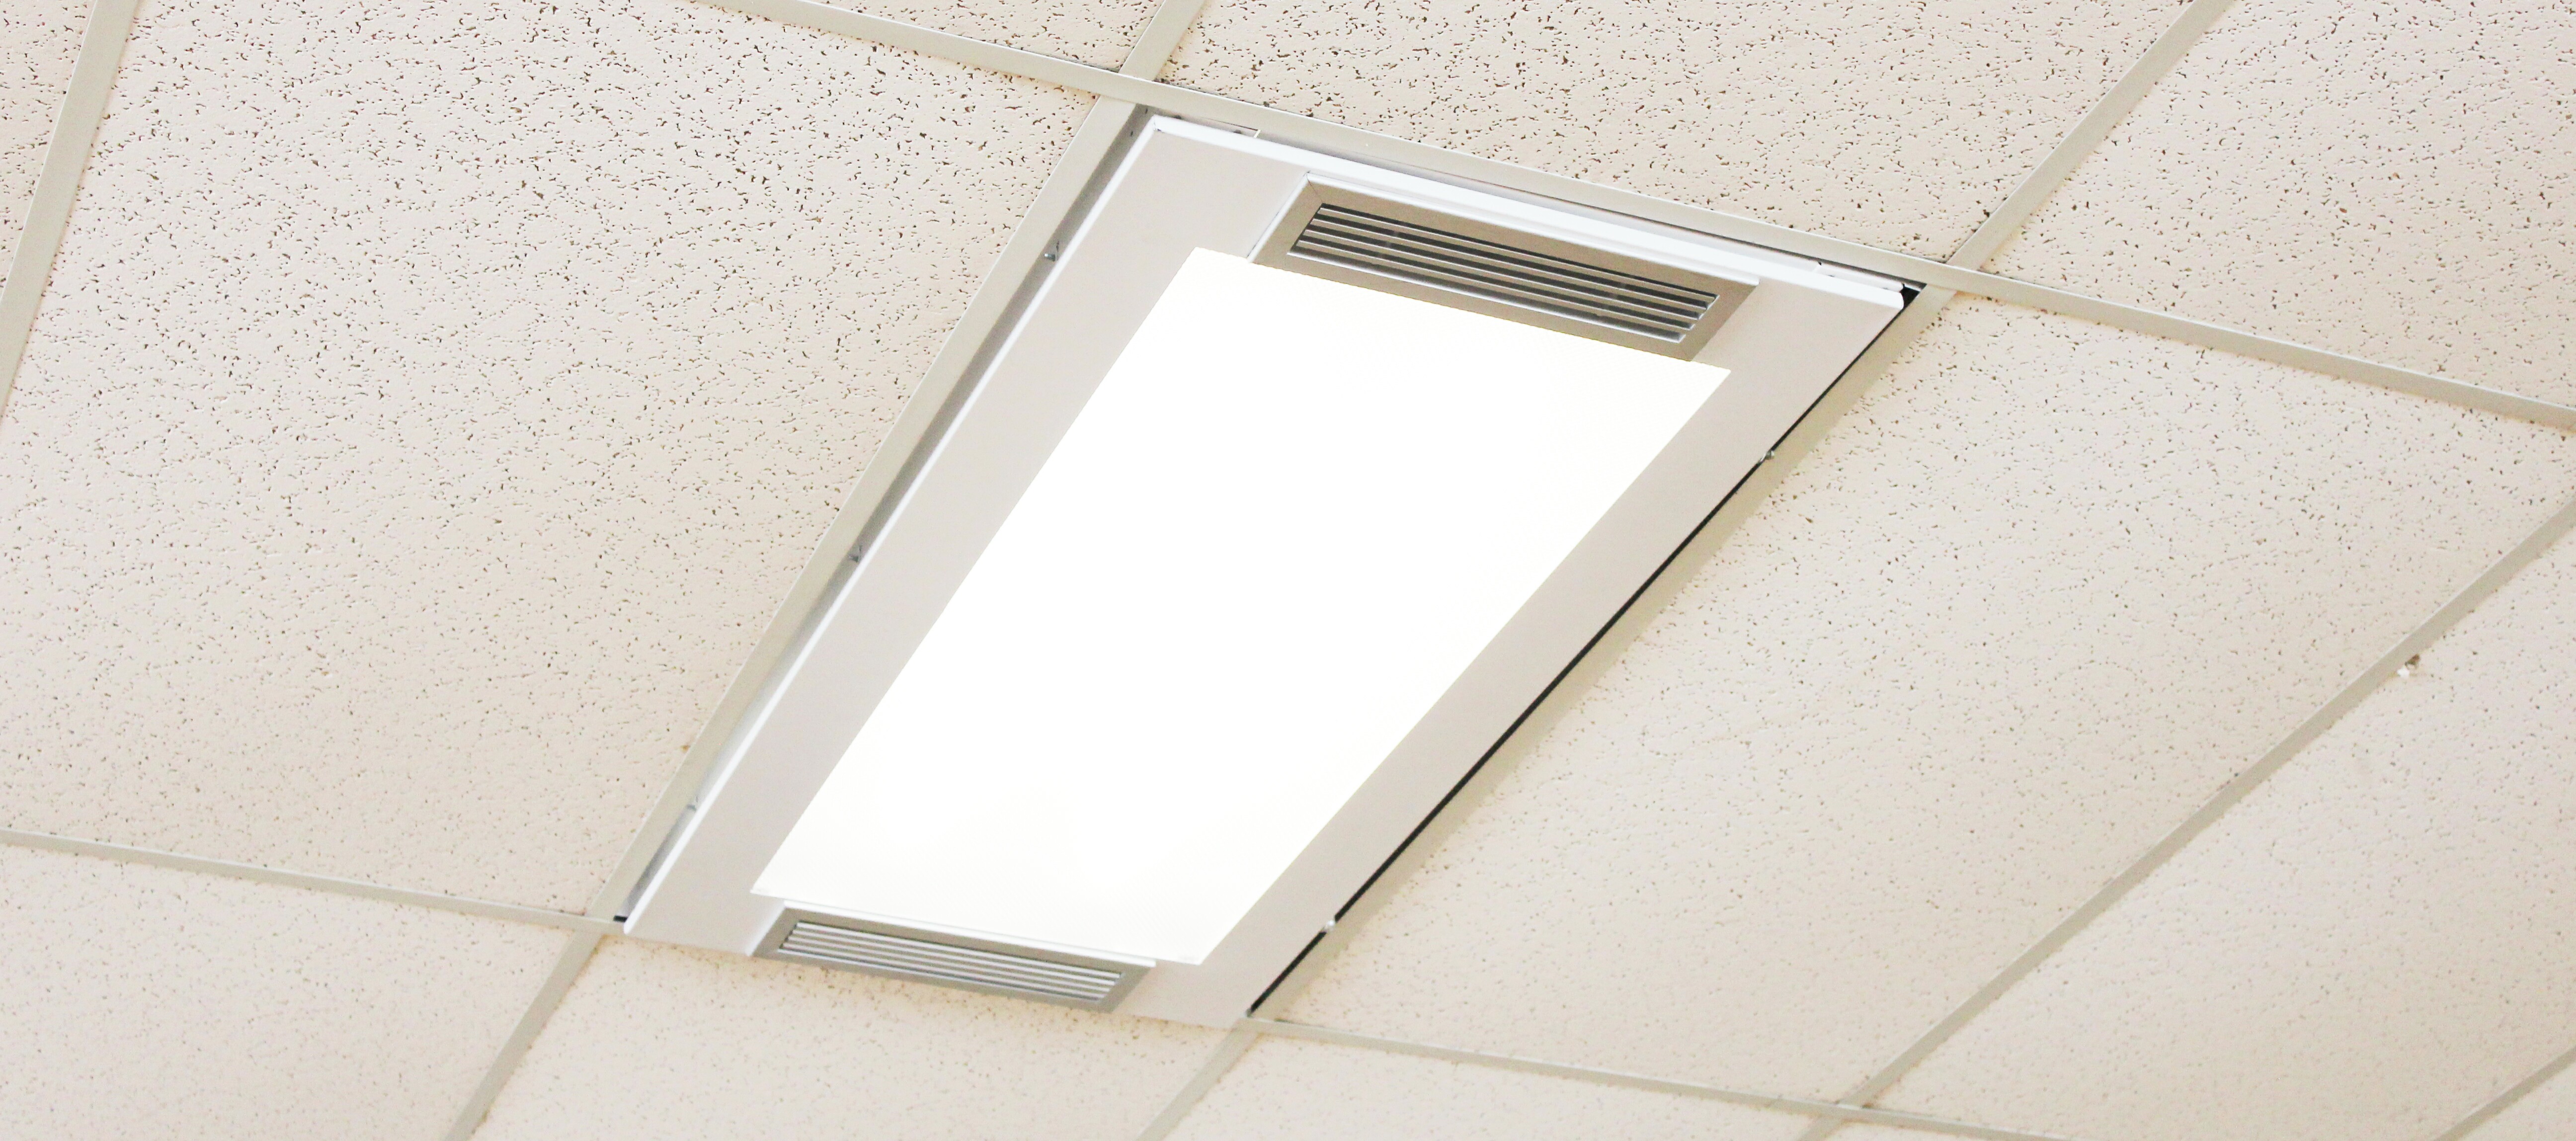 HRMS in ceiling (1)